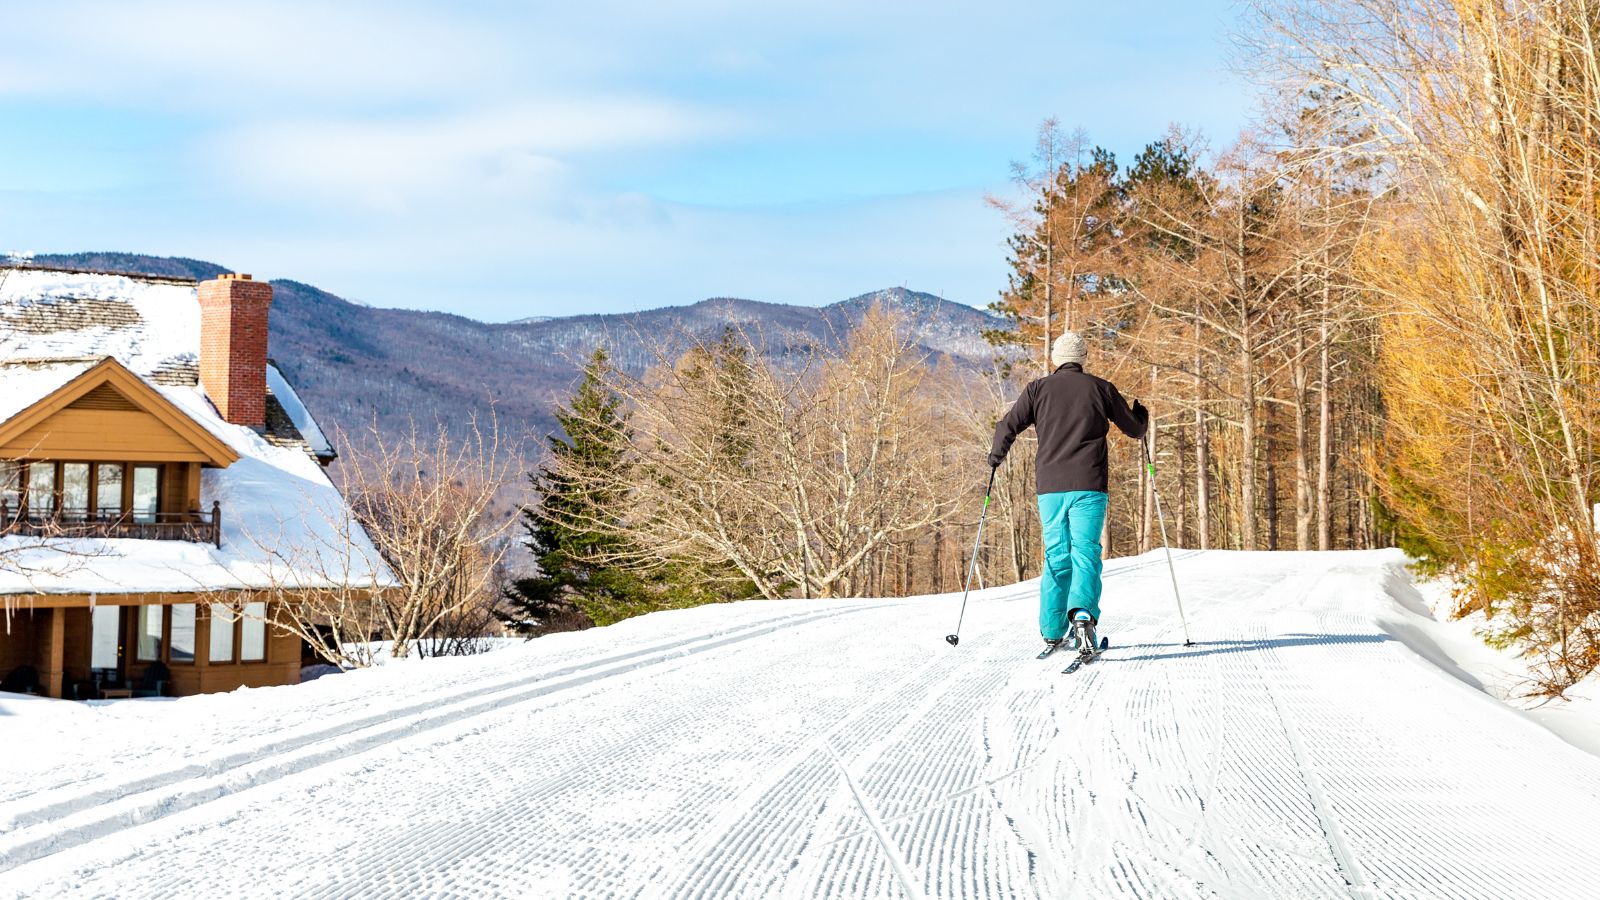 Cross-country skiing at the Trapp Family Lodge in Stowe, Vermont (Photo: Trapp Family Lodge)